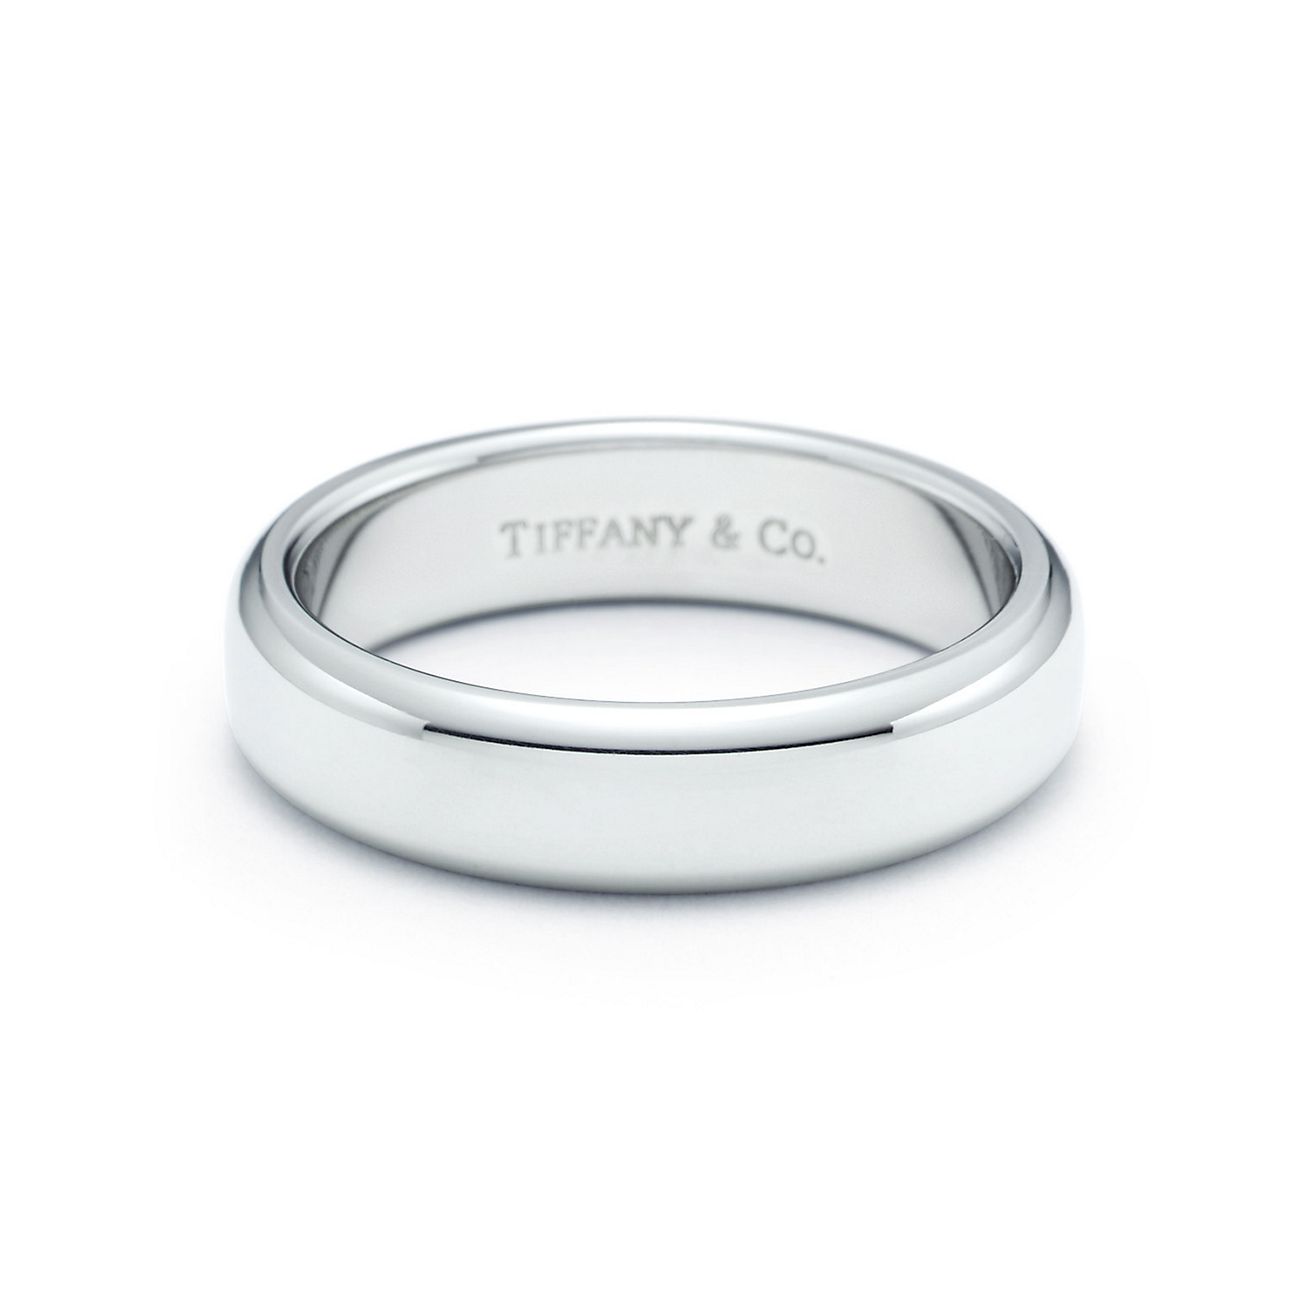 Understand and buy tiffany classic wedding band ring cheap online